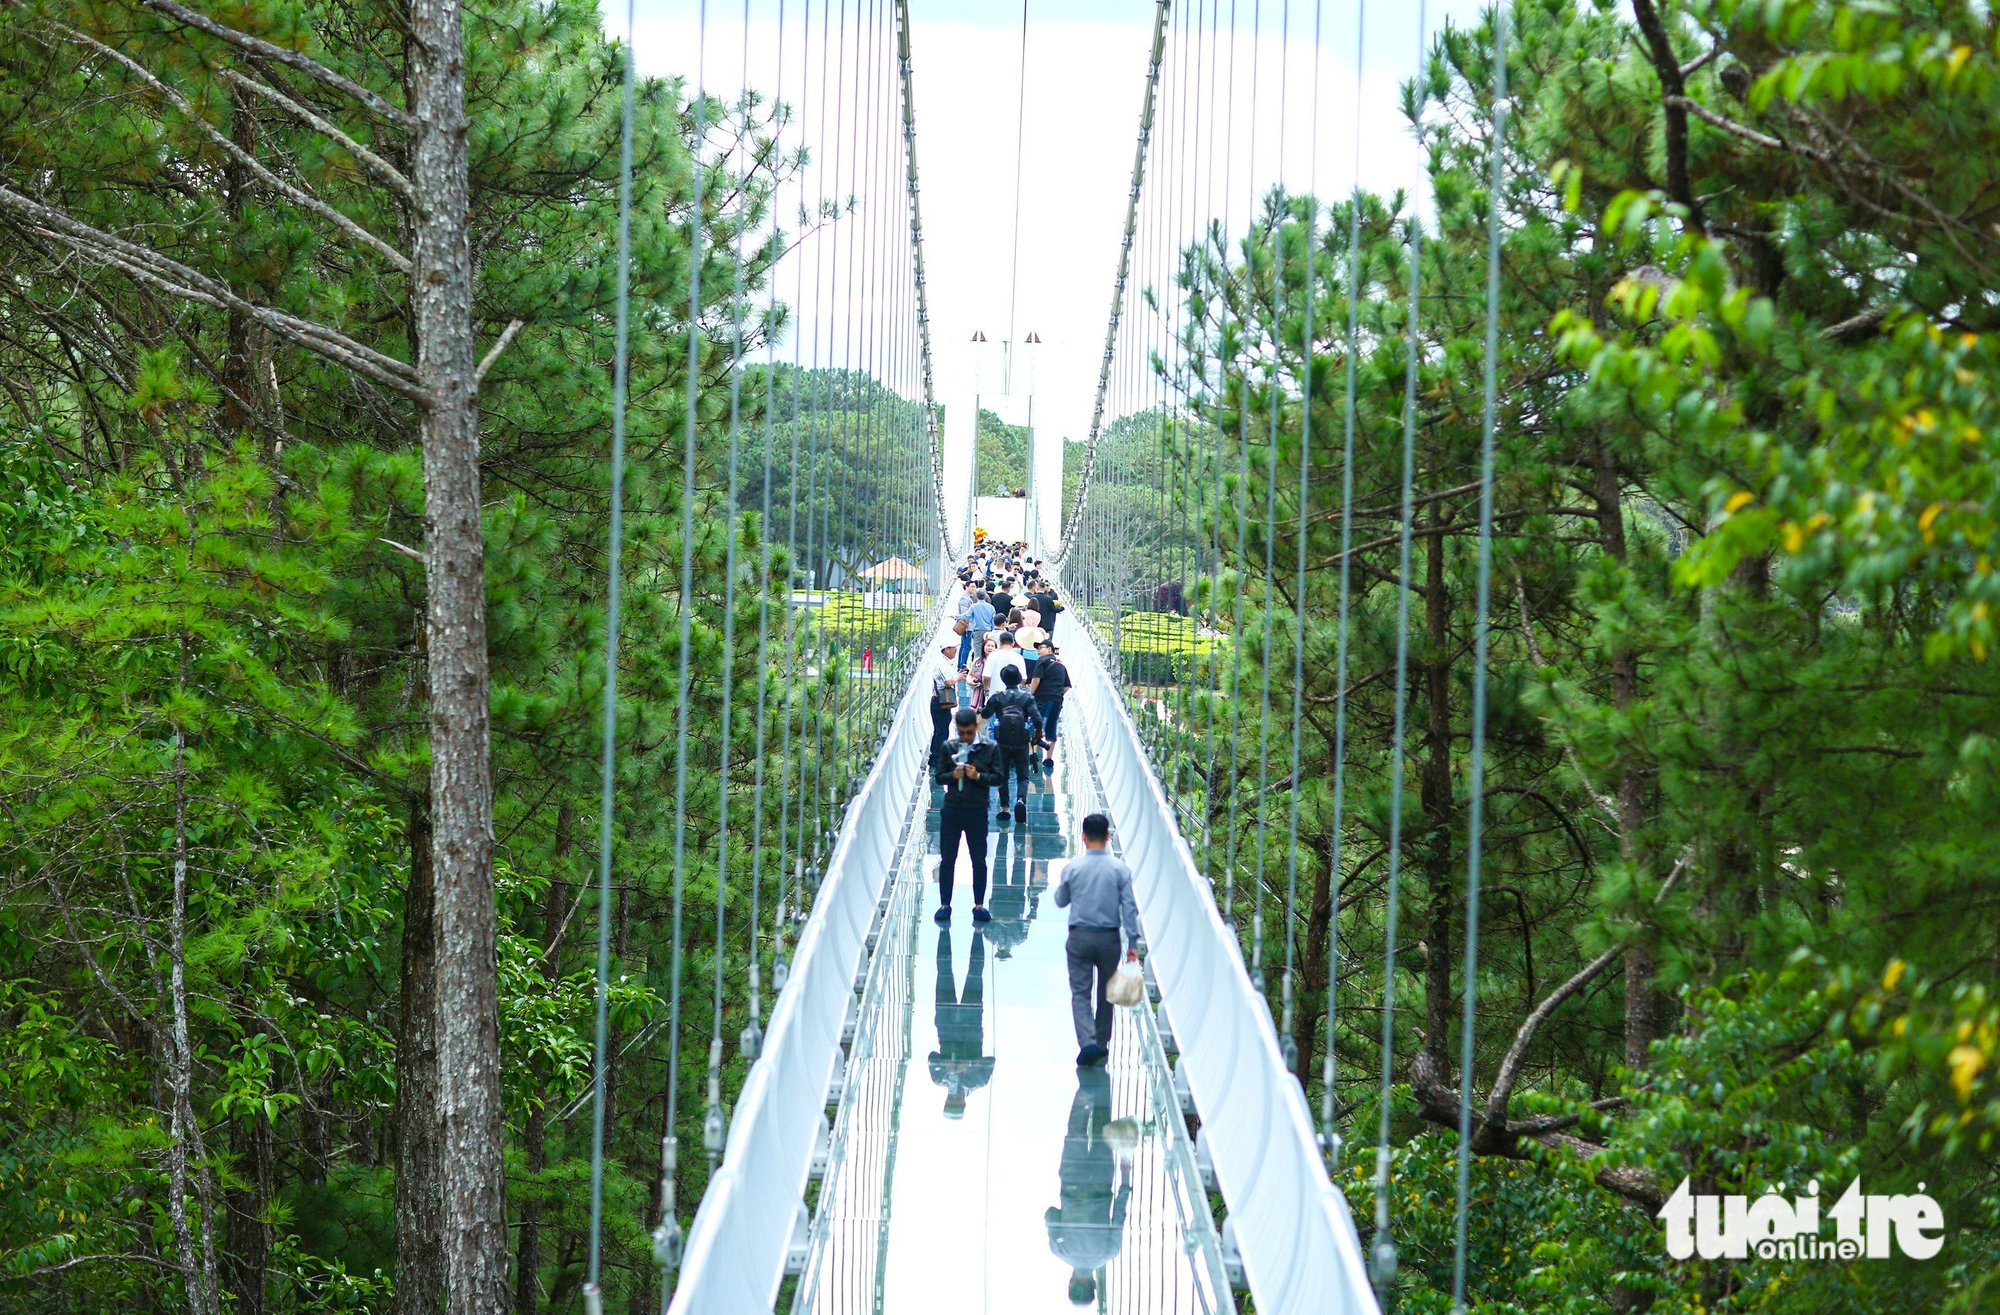 The suspension bridge is some 90 meters above pine forests below. Photo: Duc Tho / Tuoi Tre